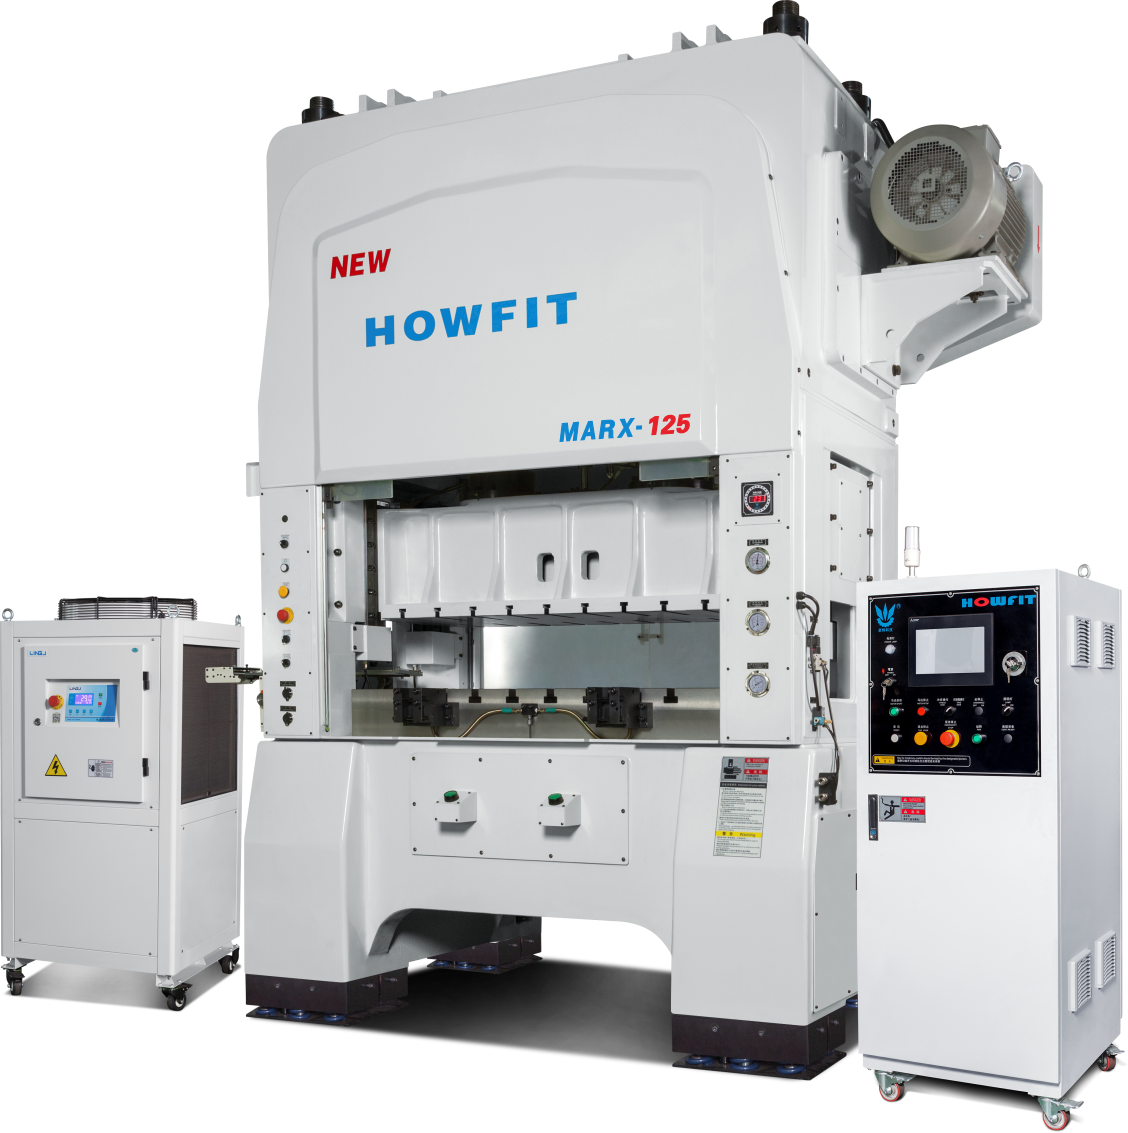 From an economic and financial point of view, discuss in detail the return on investment high-speed precision presses